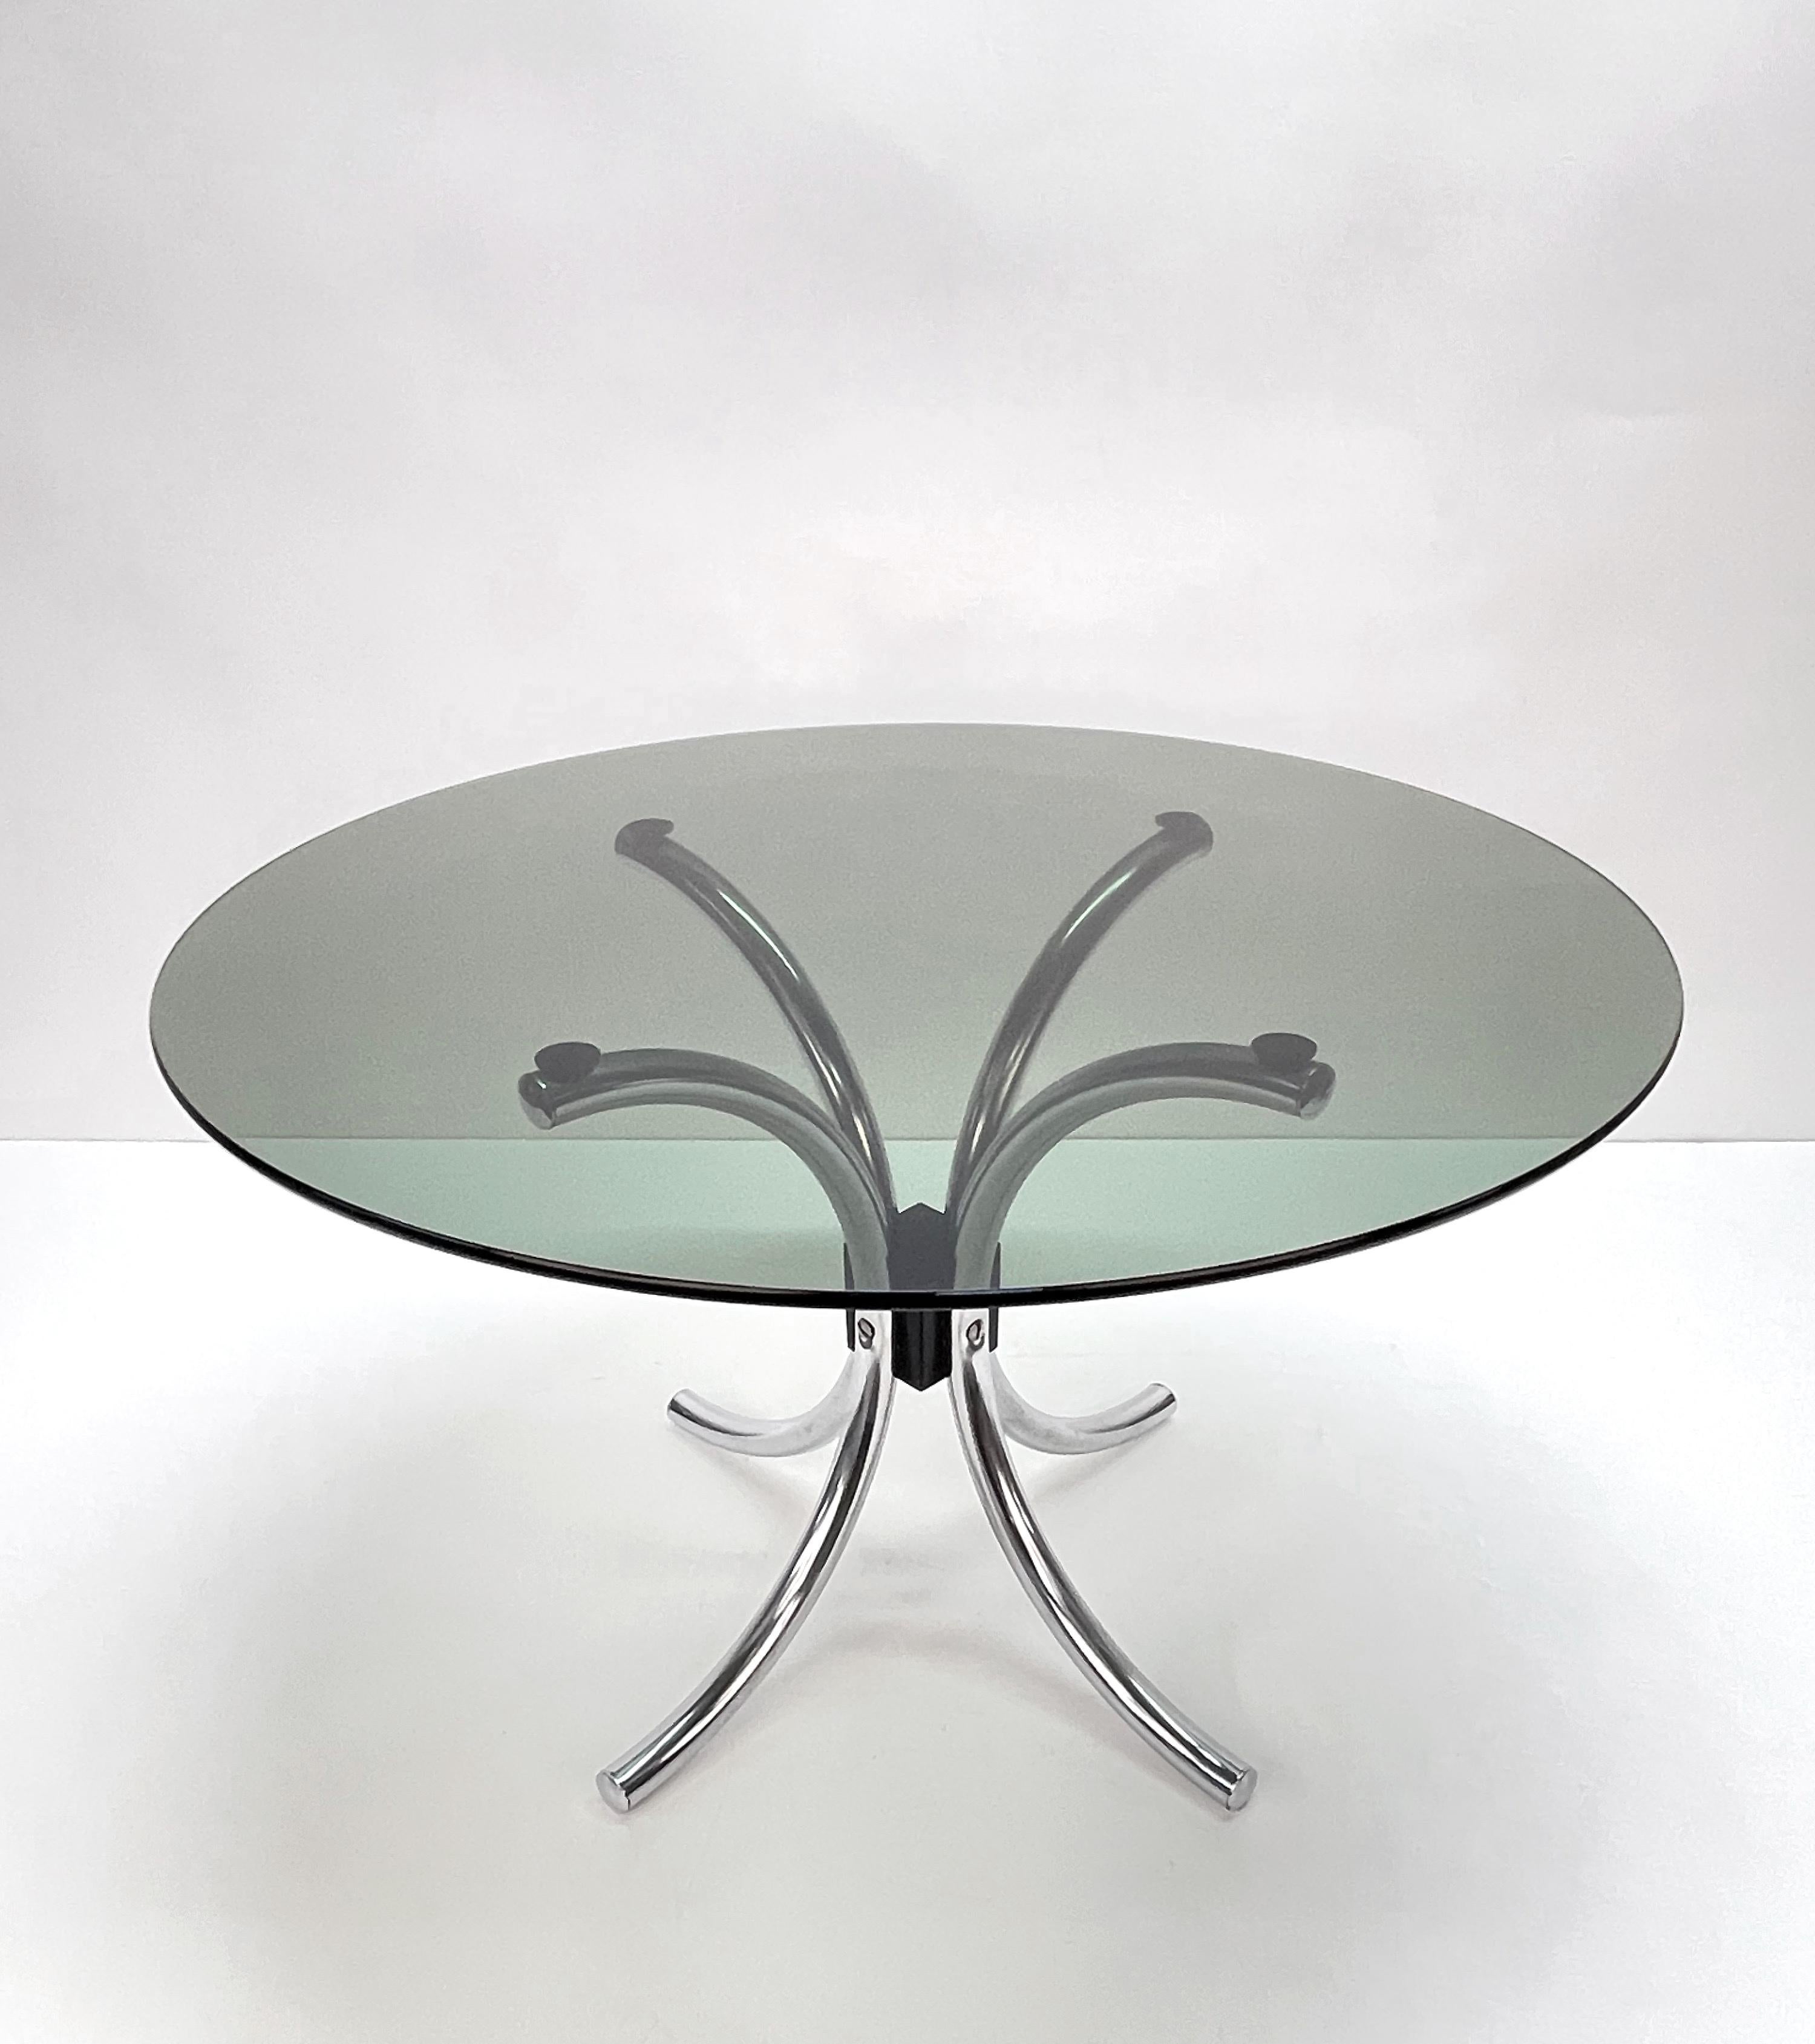 Mid-Century Modern Midcentury Chromed Steel Italian Coffee Table with Smoked Glass Round Top, 1960s For Sale